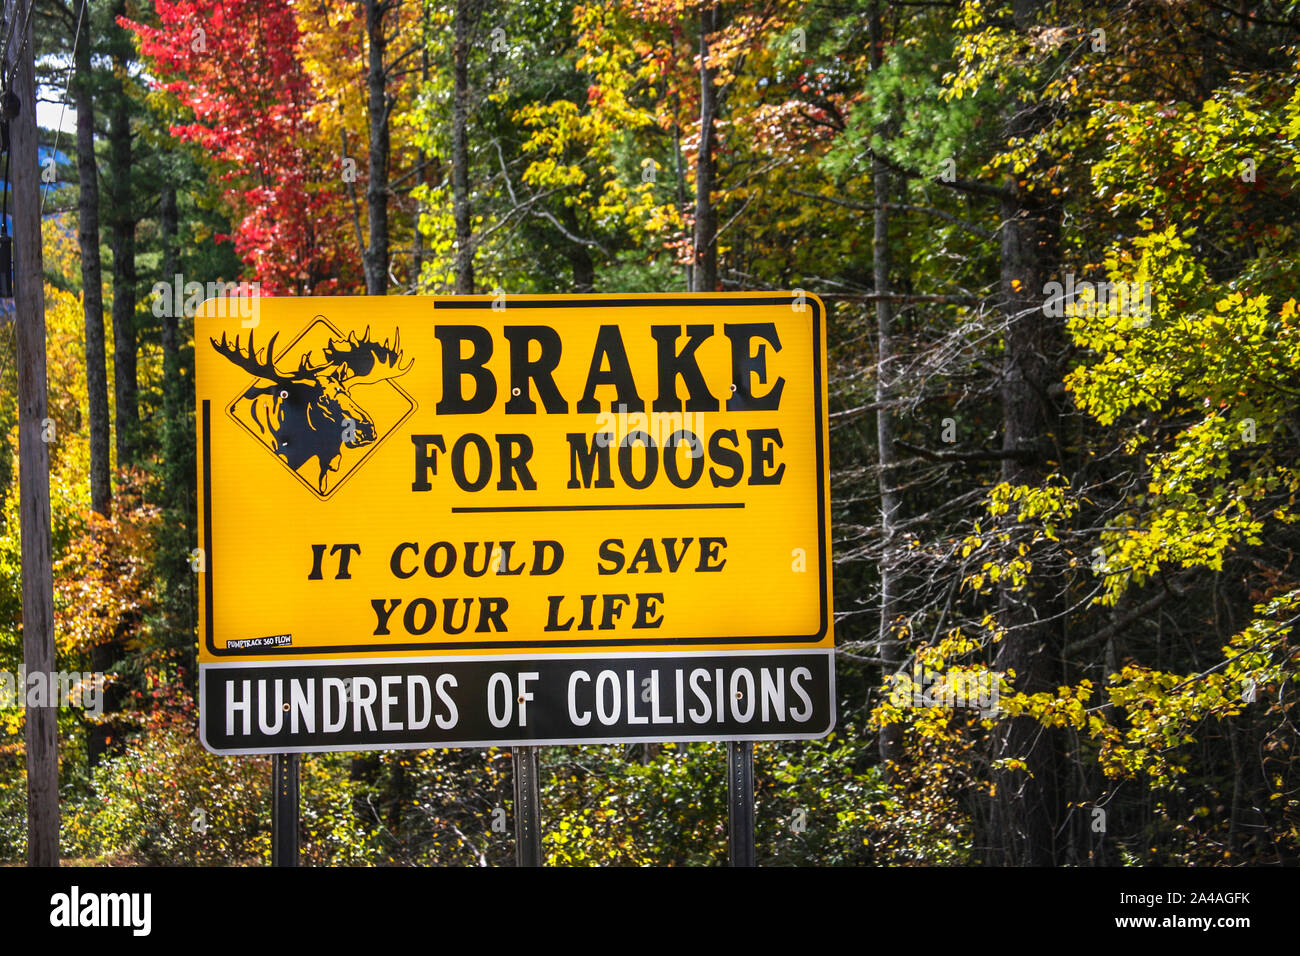 Brake for Moose sign, White Mountain National Forest,  New Hampshire, USA, New England, autumn trees, ad, US signage, 2019 Stock Photo